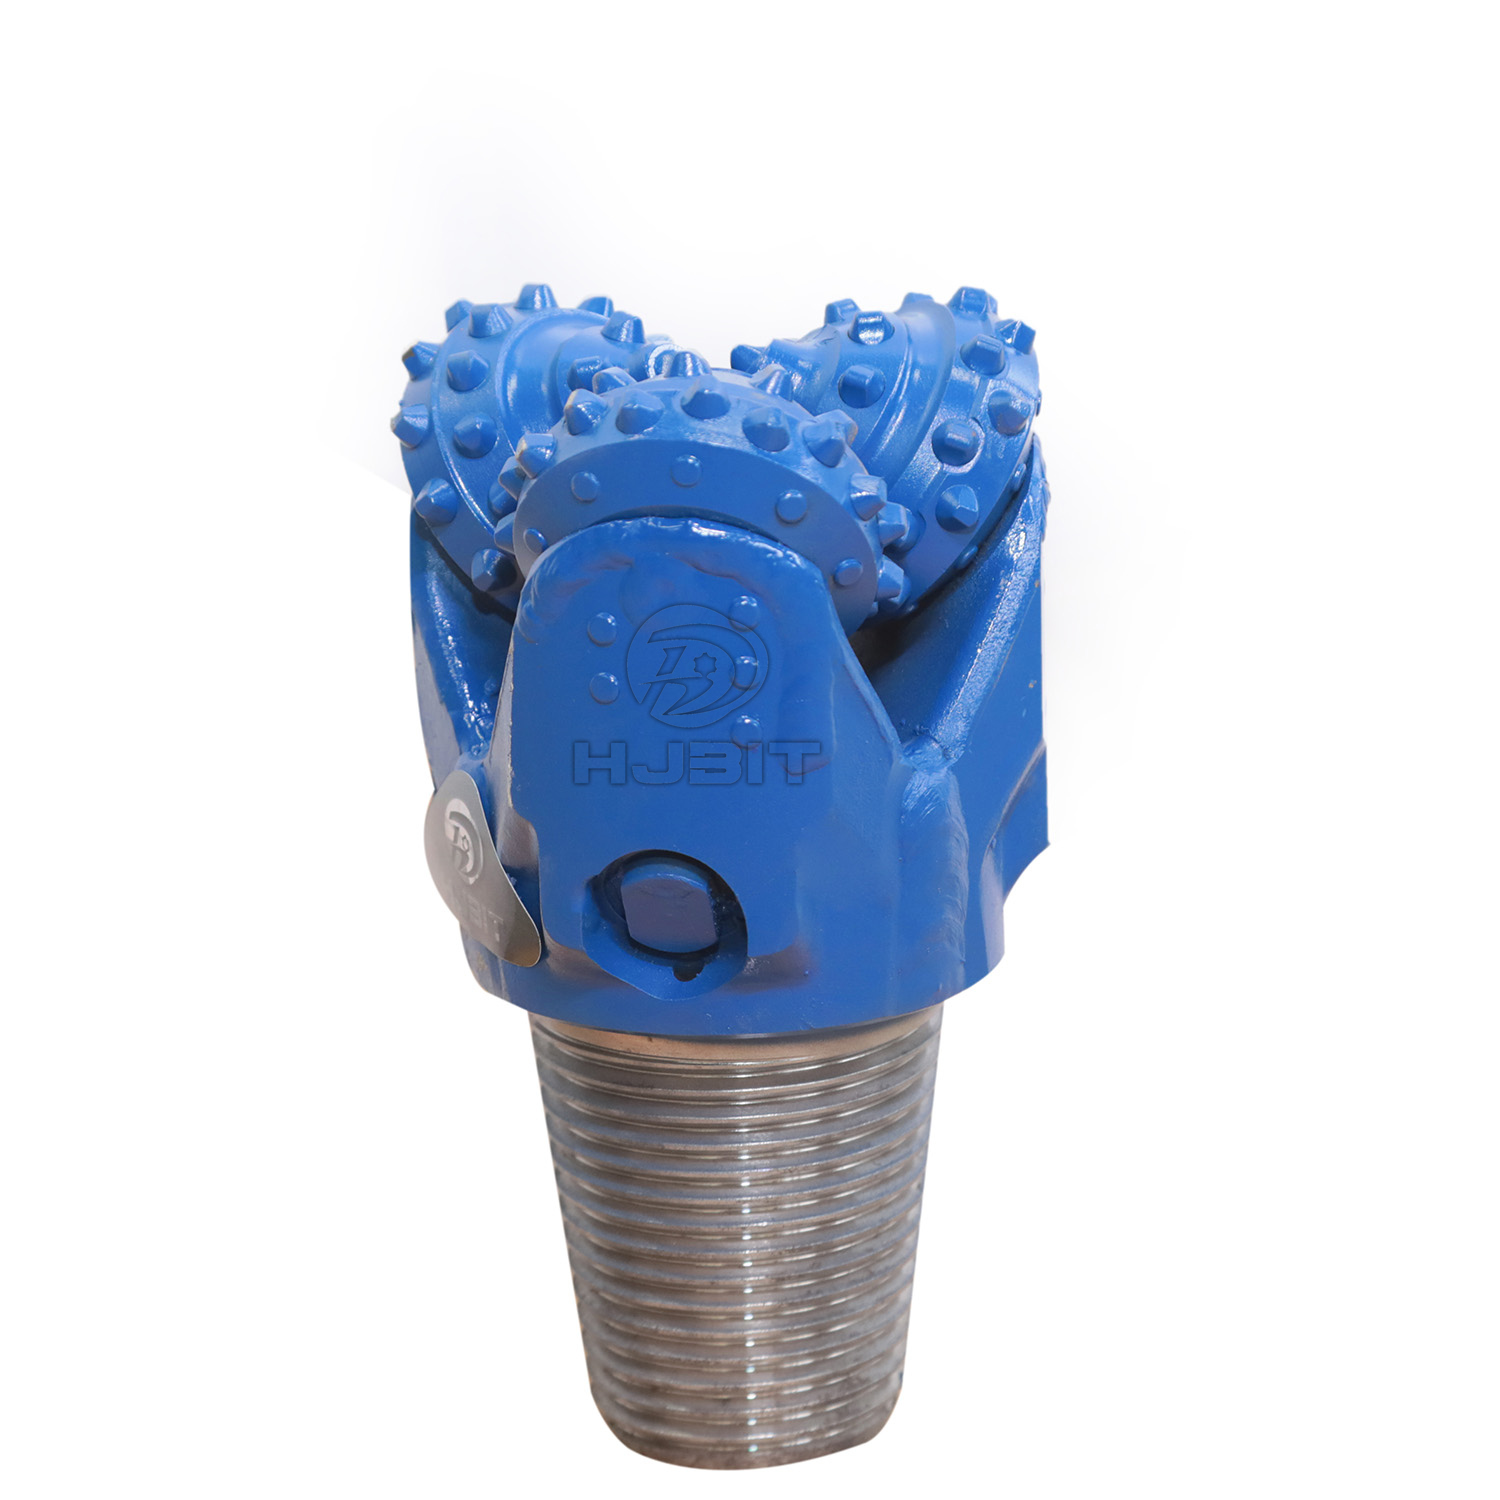 114mm IADC 537 Directional Drill Tricone Bit Manufacturer